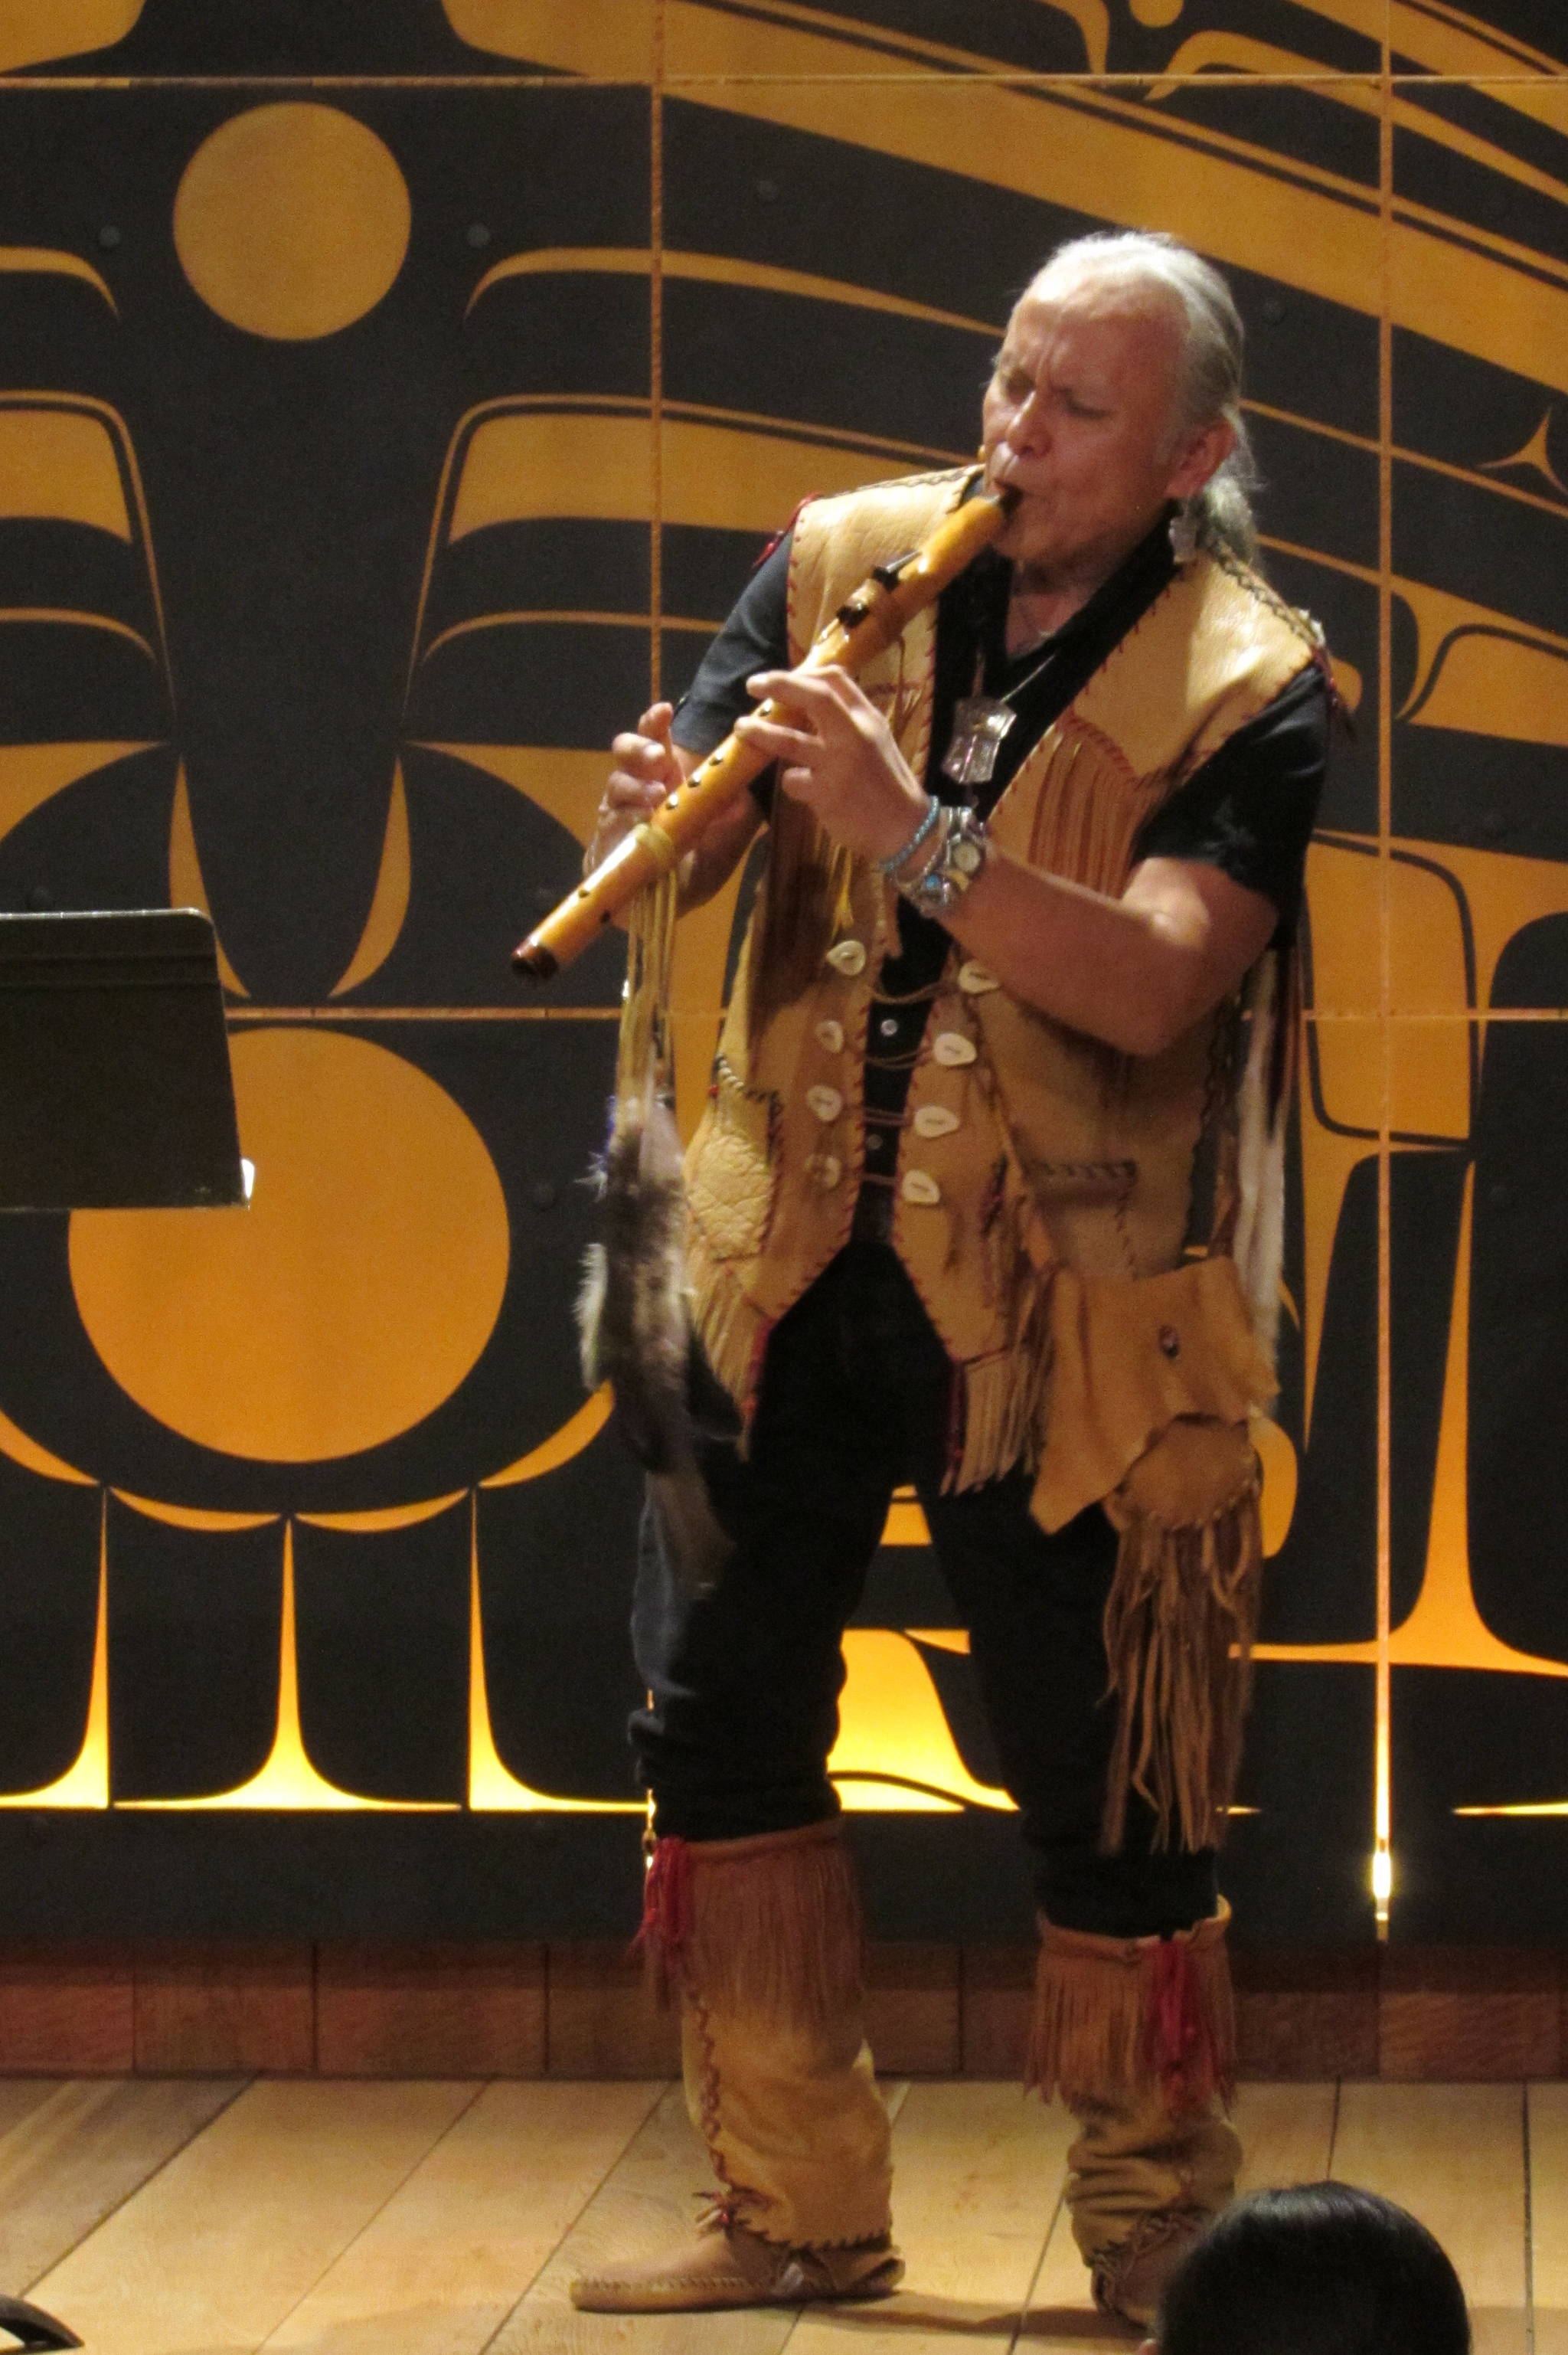 Tlingit flautist George Montero performs to open the Shuká Hít Series: Flutes From Around the World concert, Saturday, Jan. 19, 2019. (Ben Hohenstatt | Capital City Weekly)